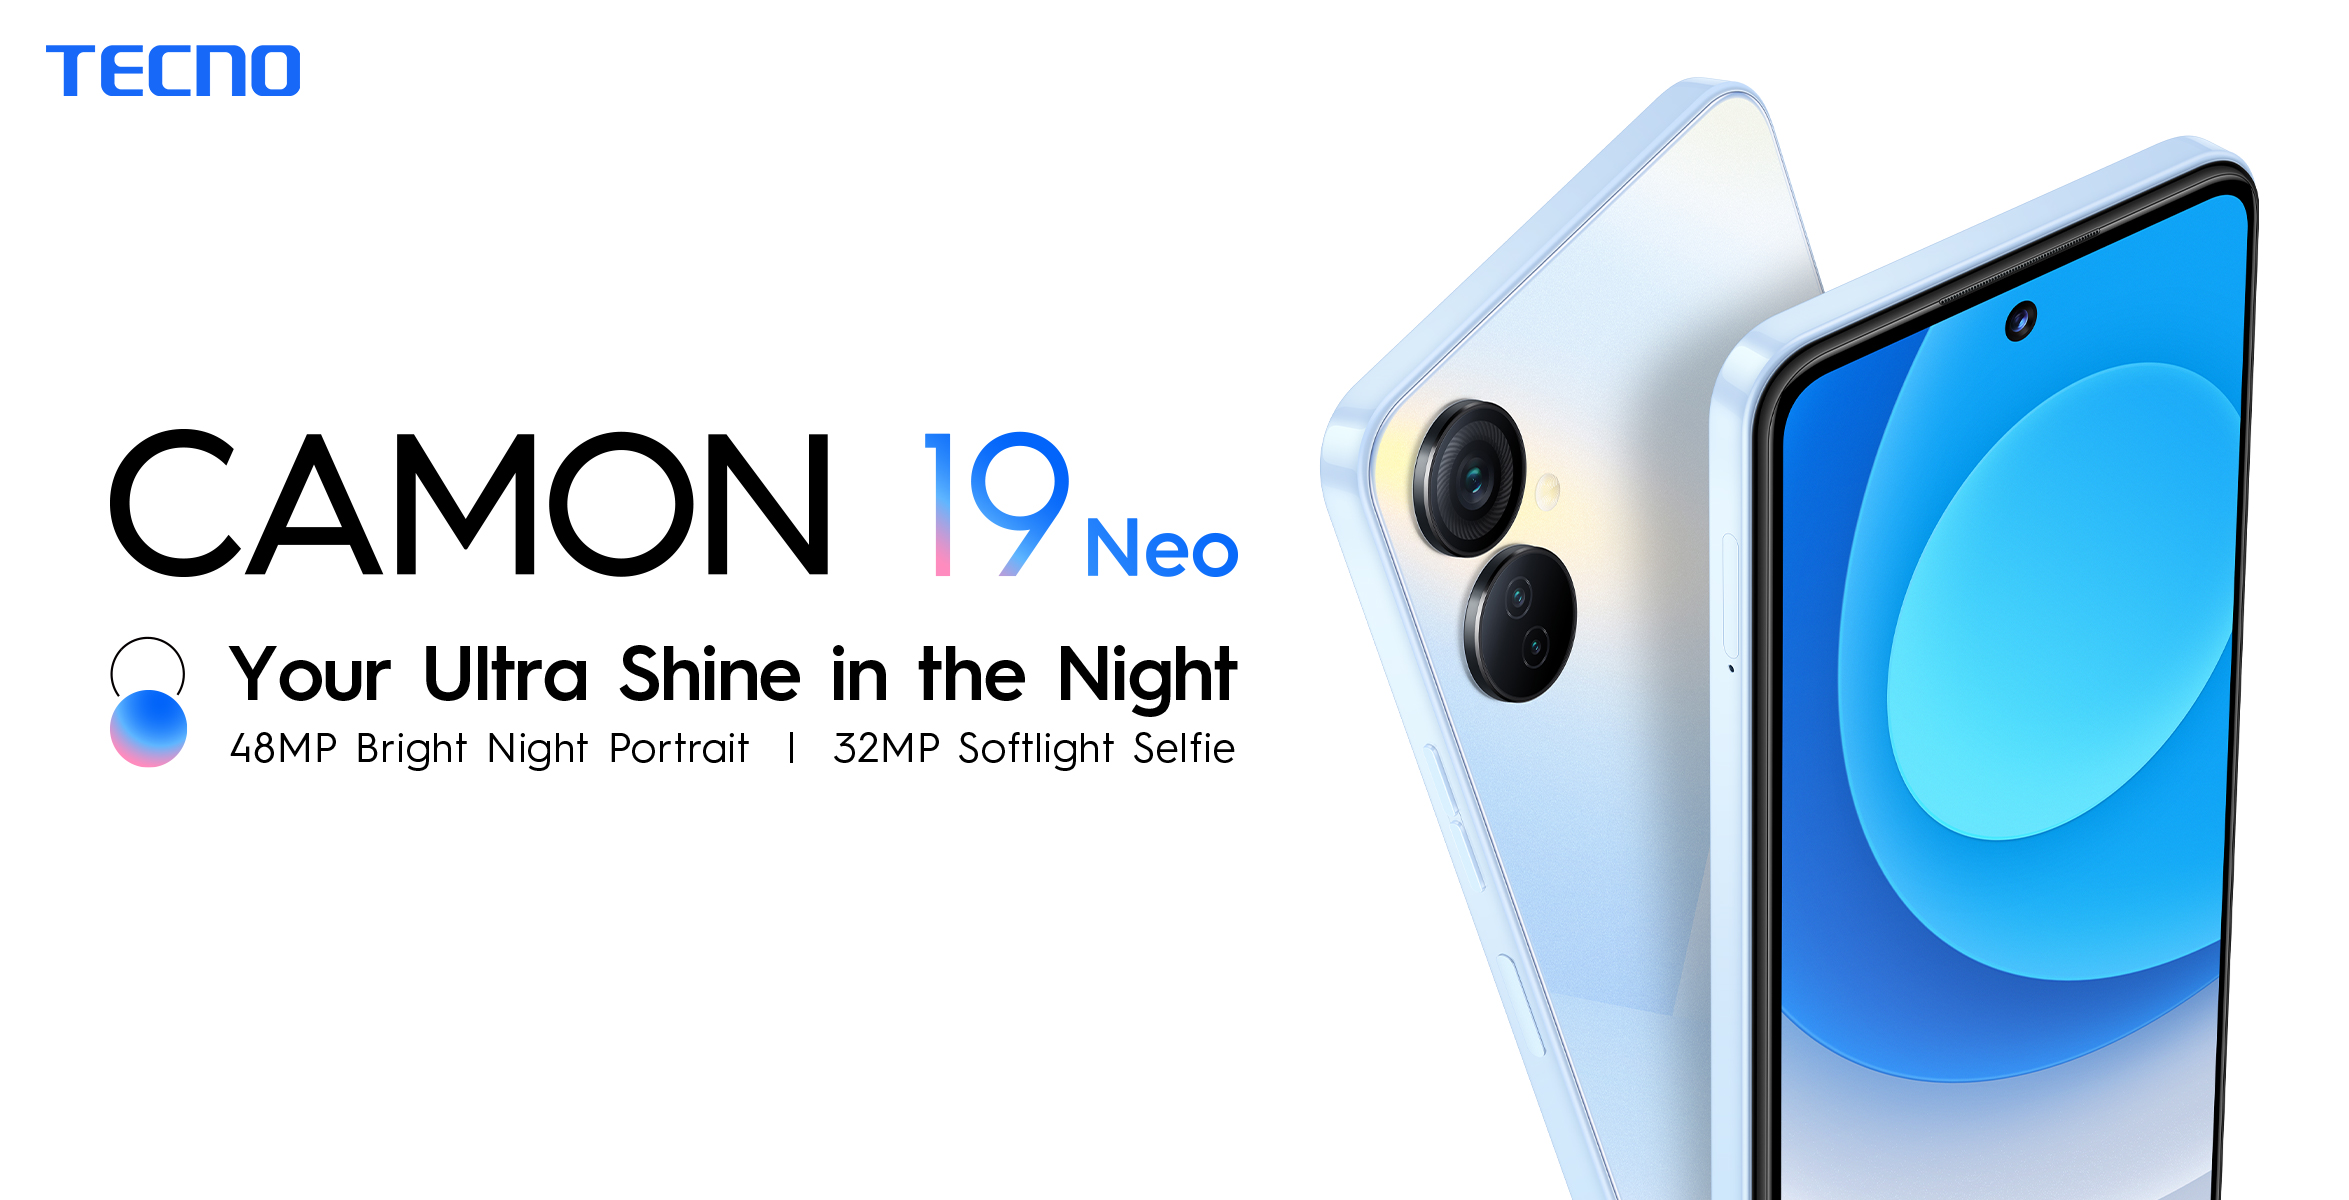 TECNO Camon 19 Neo with 32MP Softlight Selfie Camera Now Available nationwide